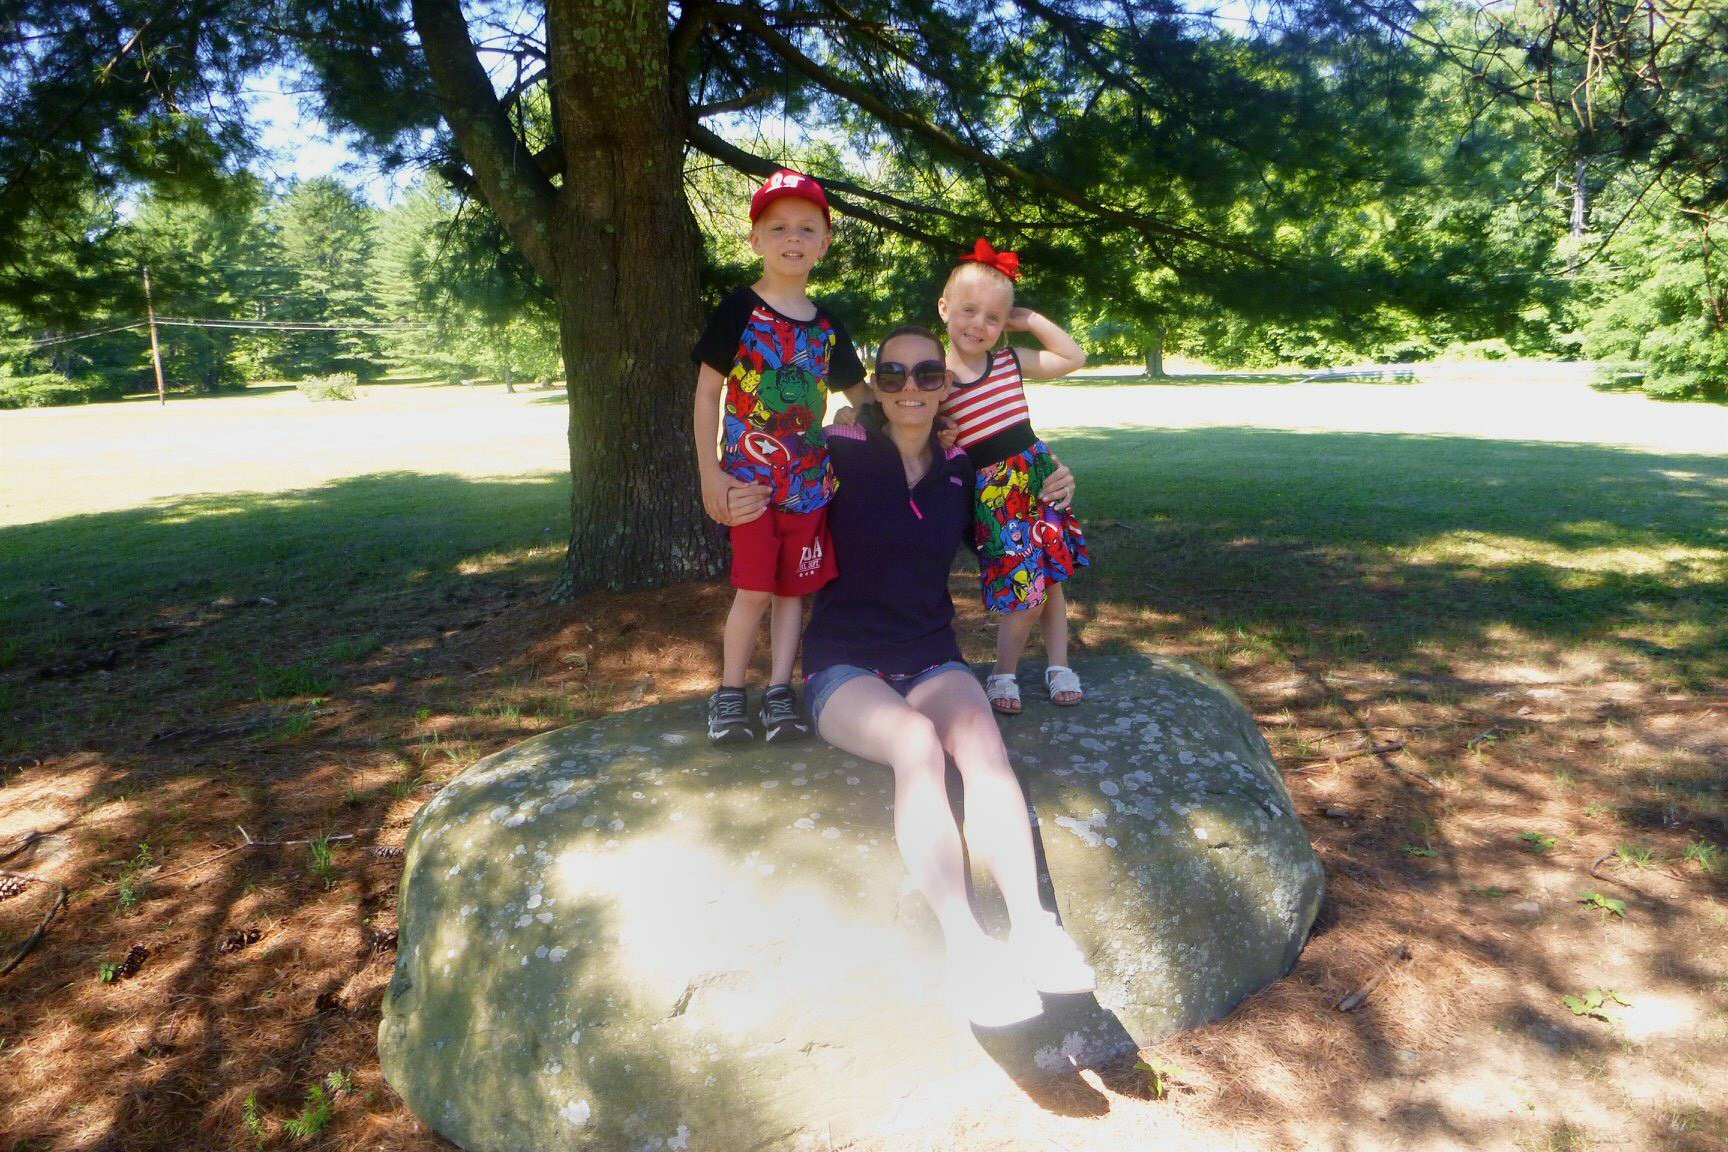 PHOTO: Colleen Morgan, of New York, poses with her children Brian and Julianna.